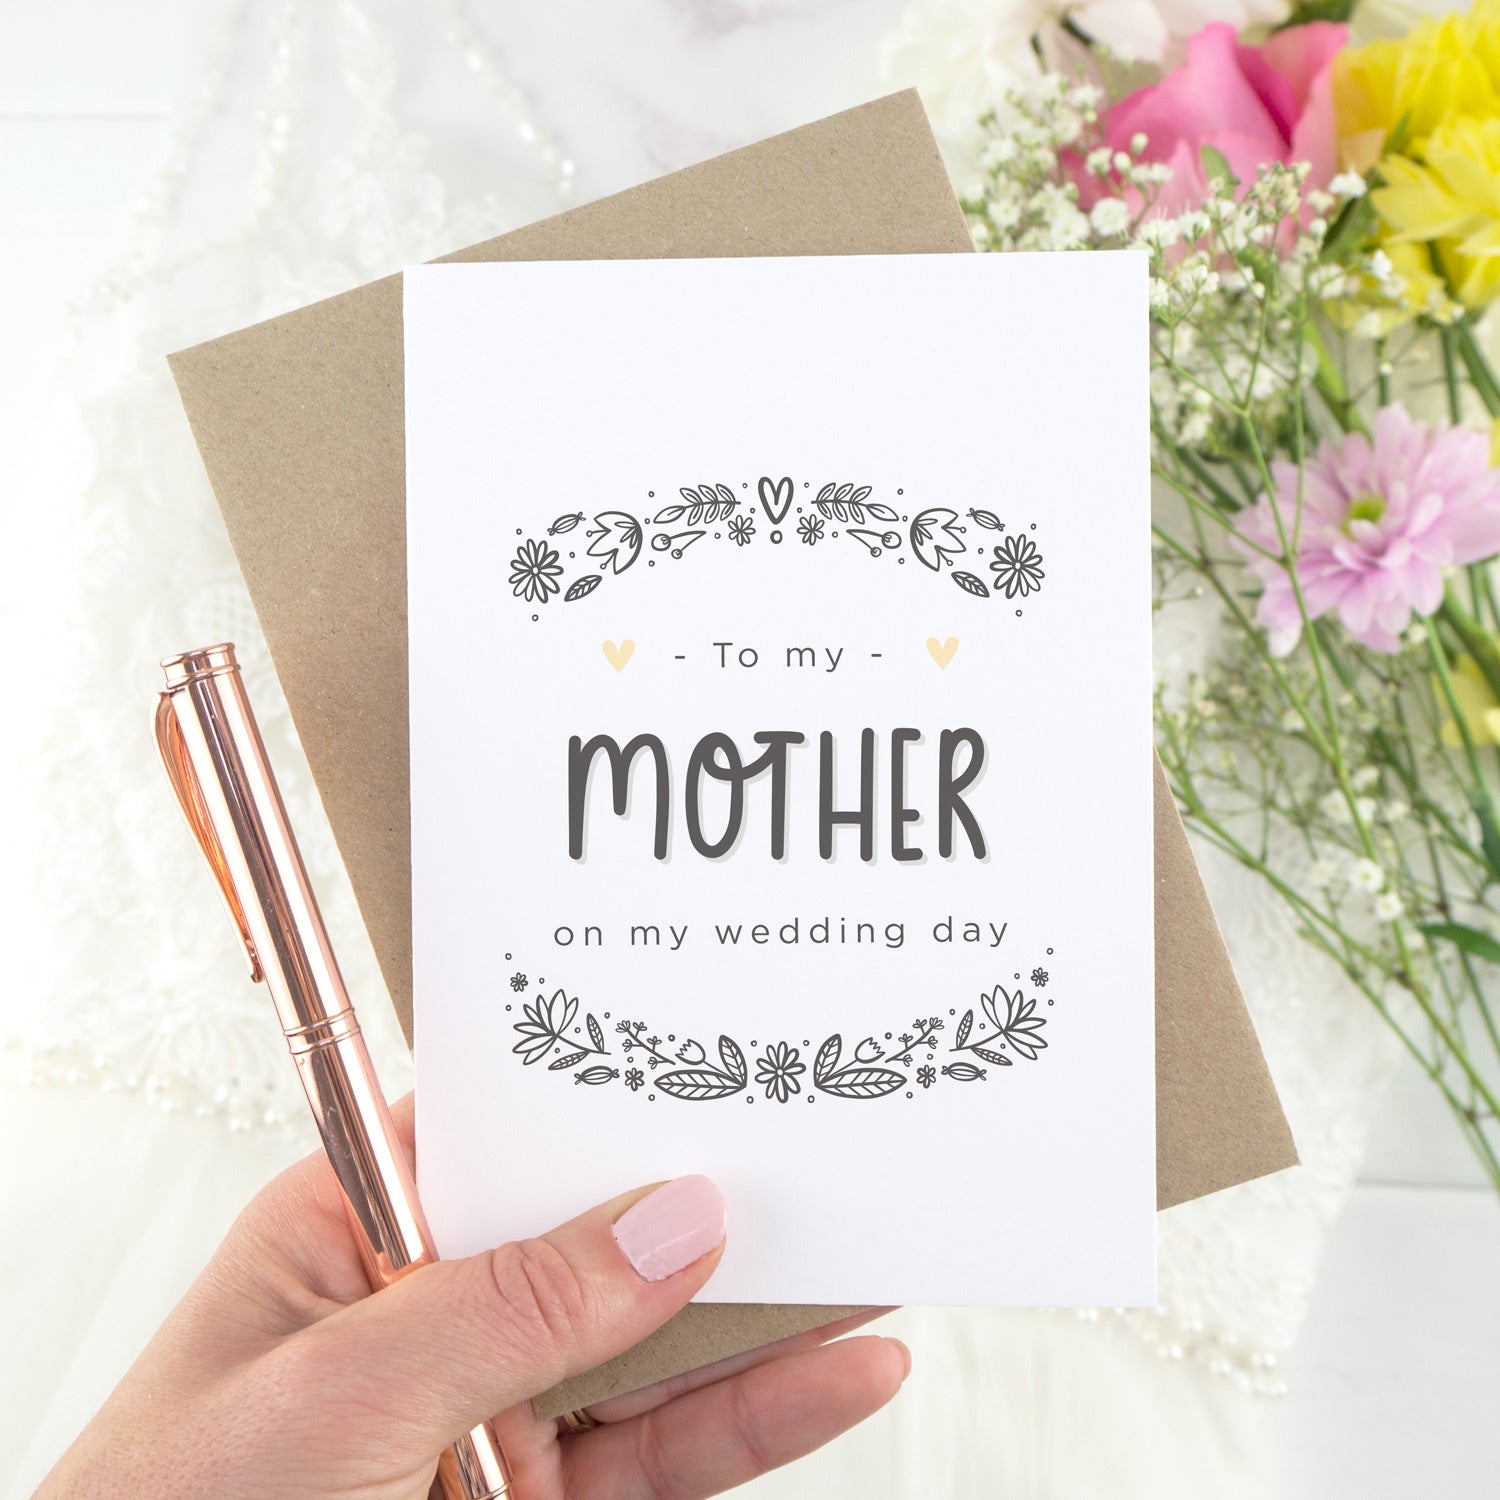 To my mother on my wedding day. A white card with grey hand drawn lettering, and a grey floral border. The image features a wedding dress and bouquet of flowers.